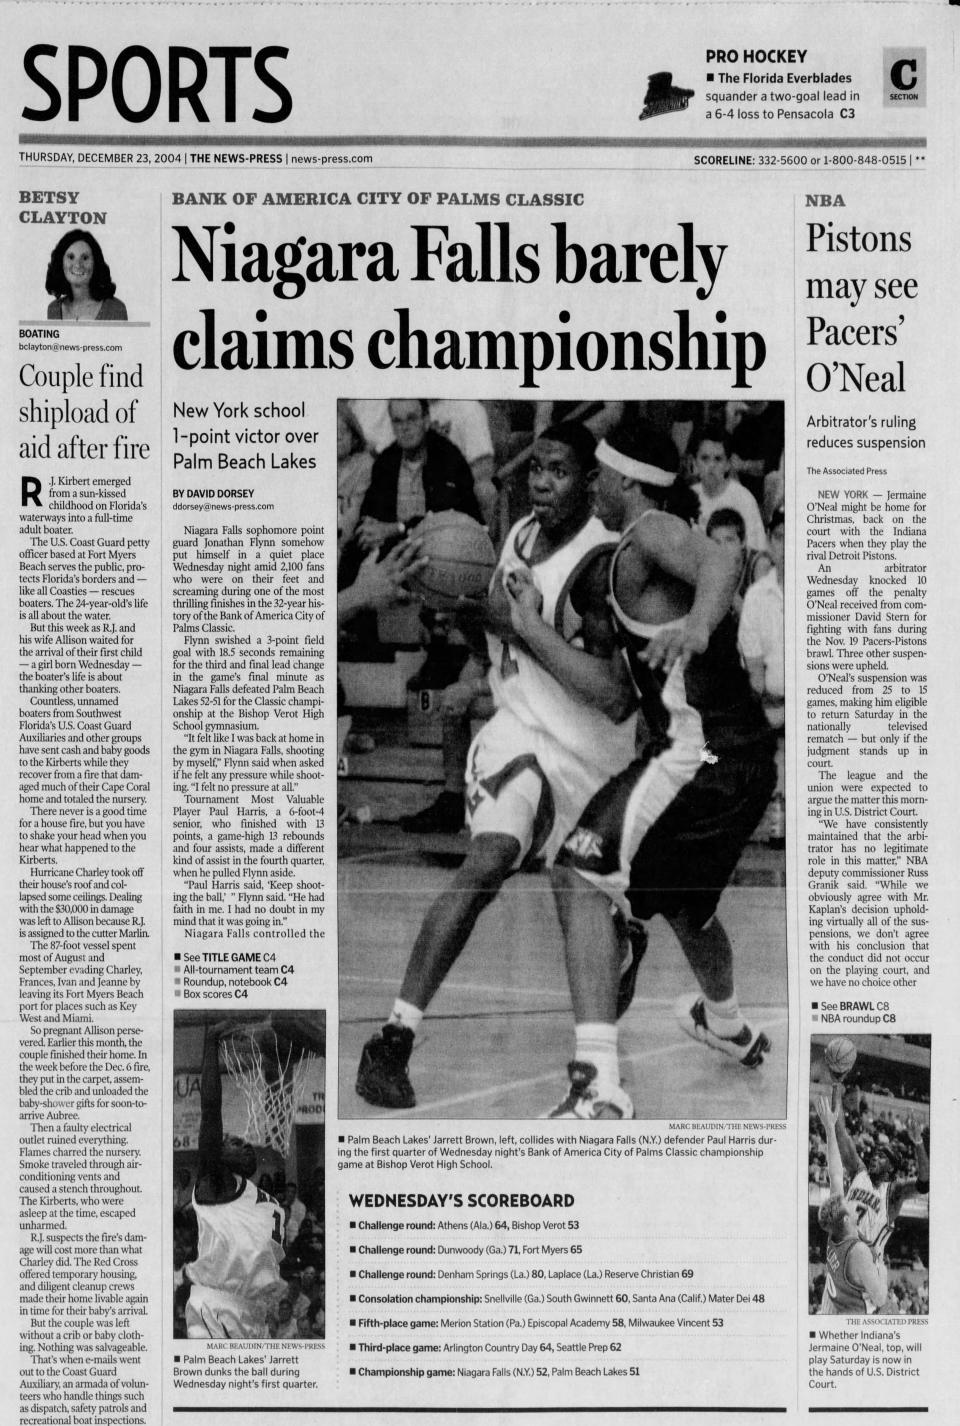 The News-Press cover for the 2004 City of Palms Classic championship game.